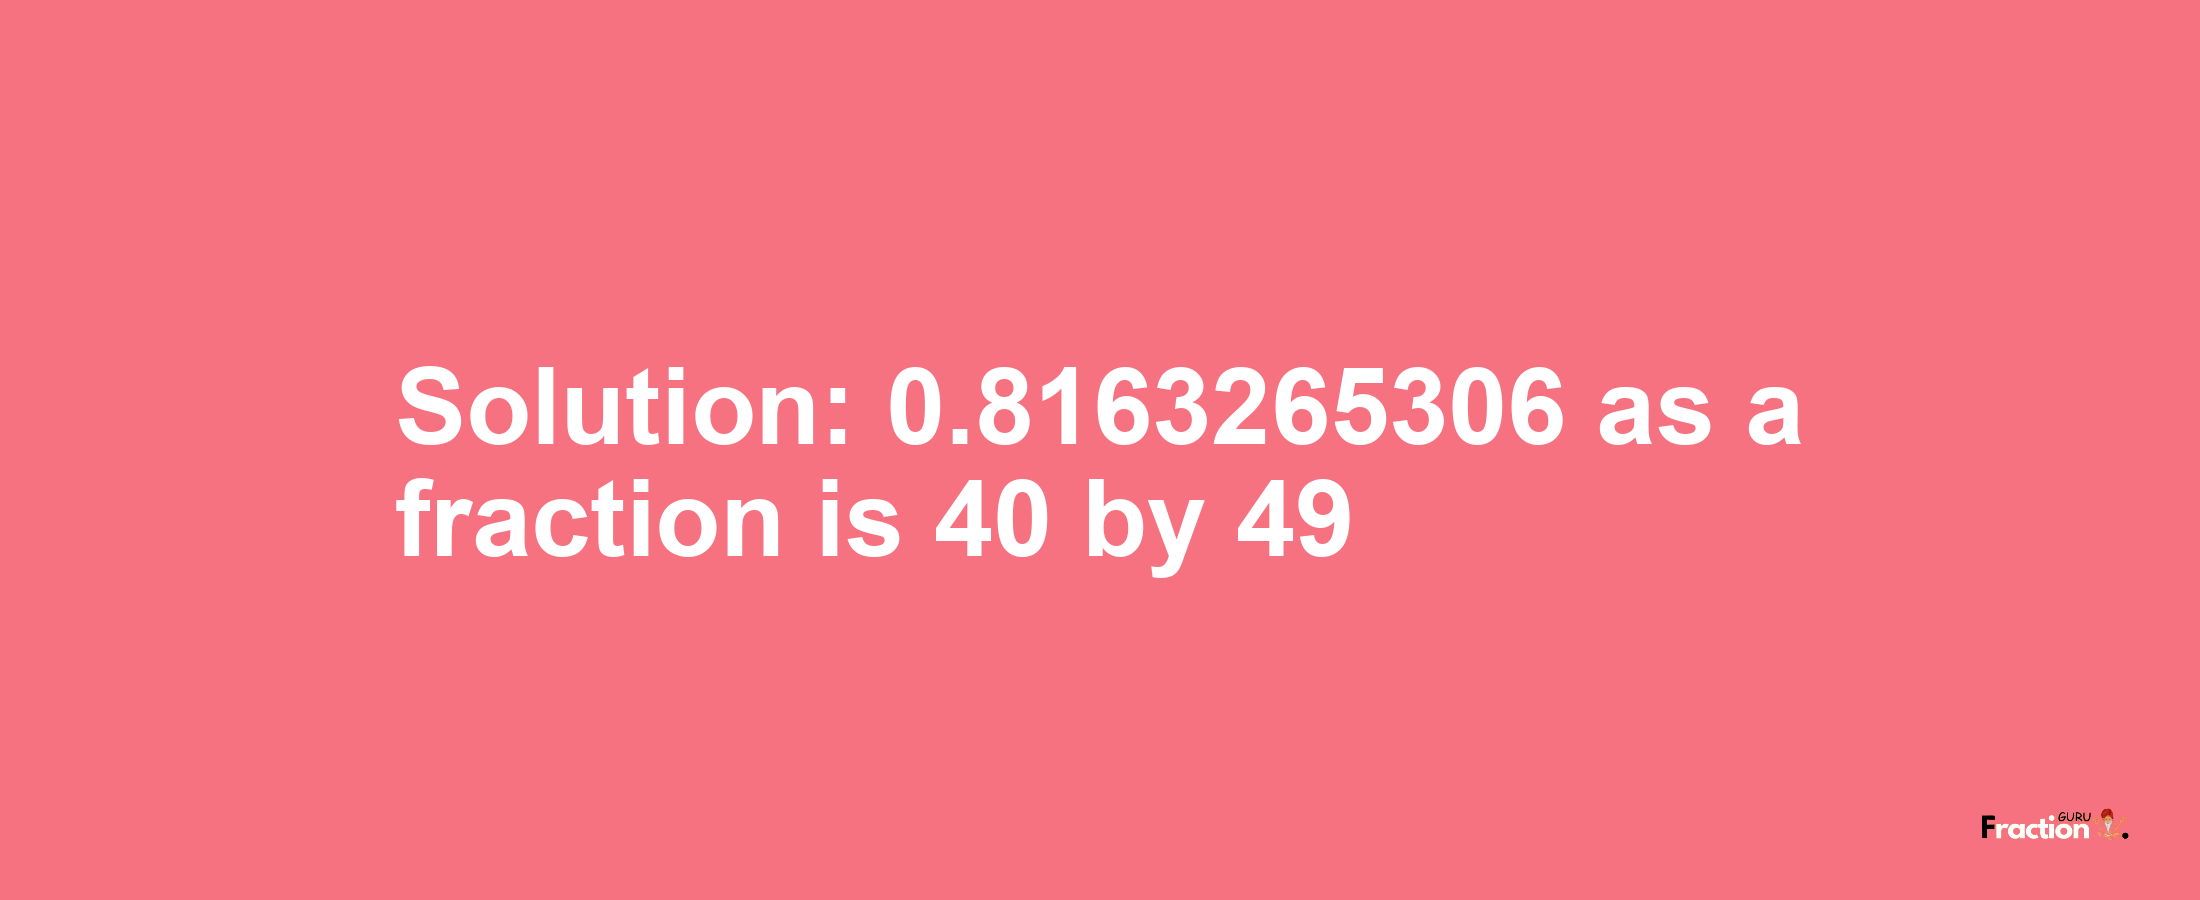 Solution:0.8163265306 as a fraction is 40/49